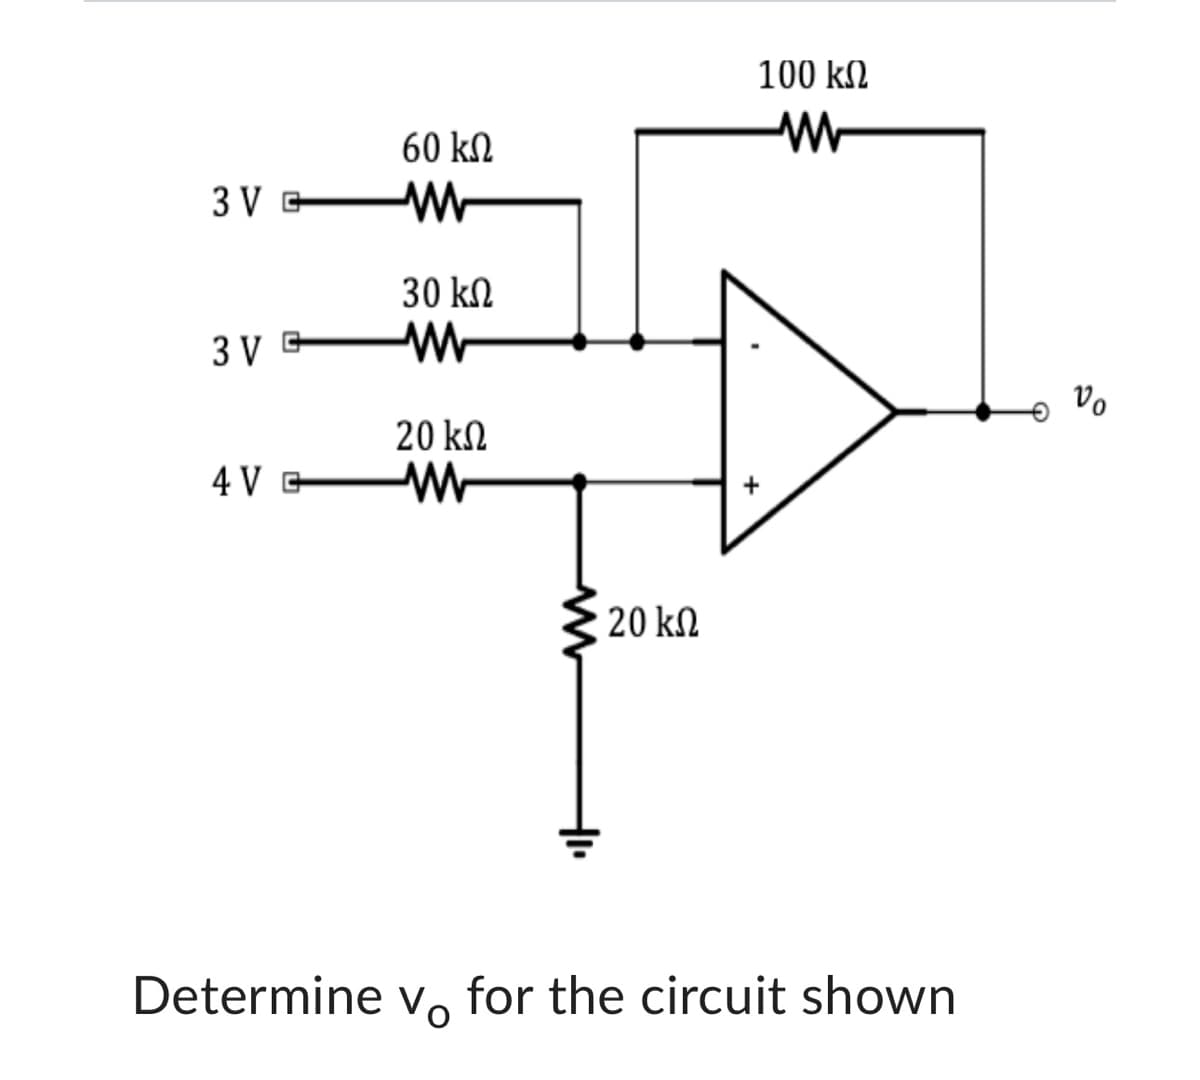 3 VG
3 VG
4 V G
60 ΚΩ
WW
30 ΚΩ
20 ΚΩ
M
www
• 20 ΚΩ
100 ΚΩ
WW
Determine v for the circuit shown
Vo